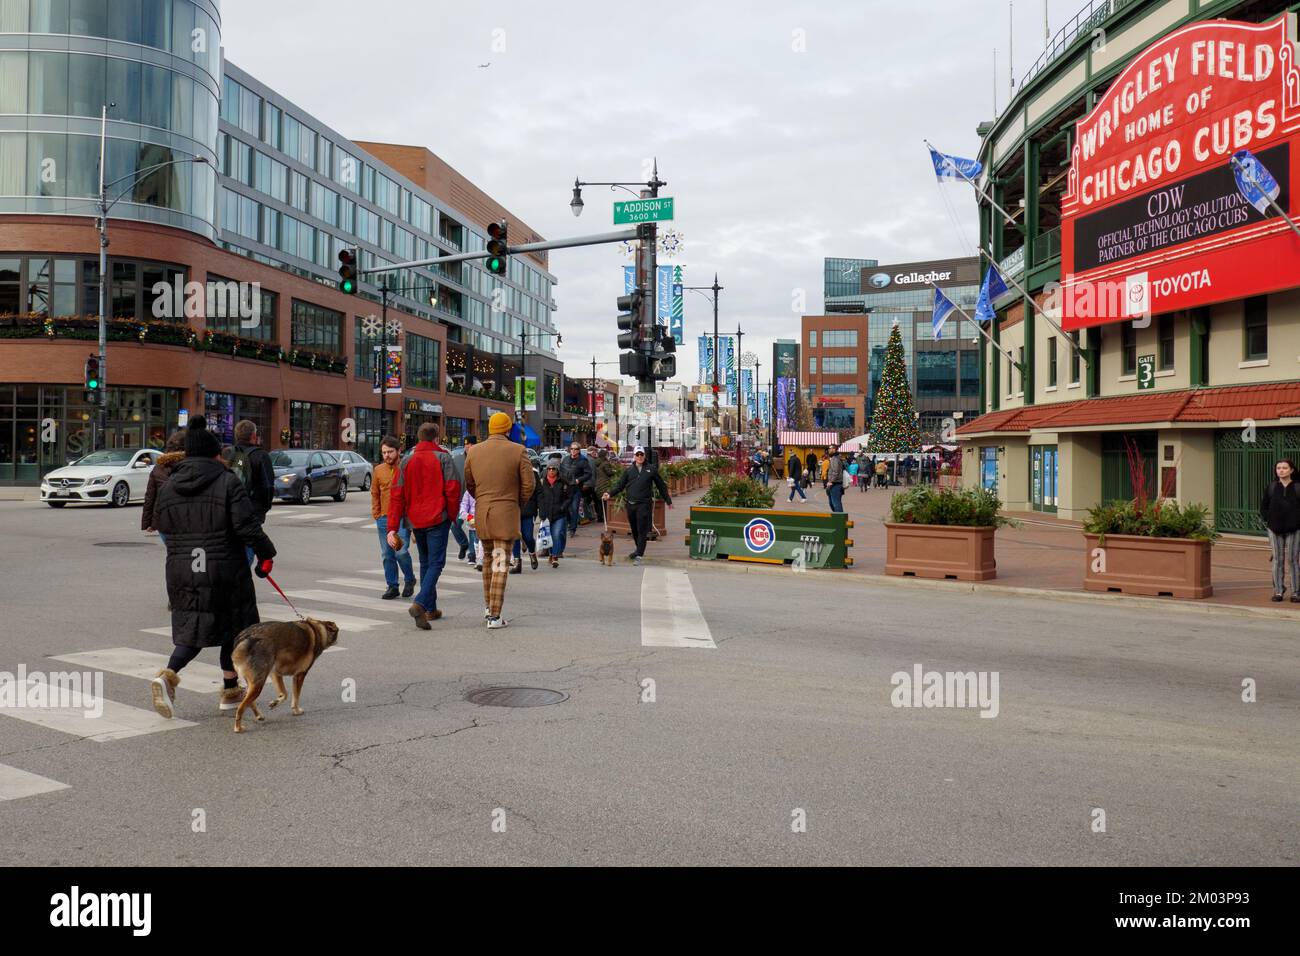 Wrigley Field at Clark and Addison Streets, Chicago, Illinois. Stock Photo